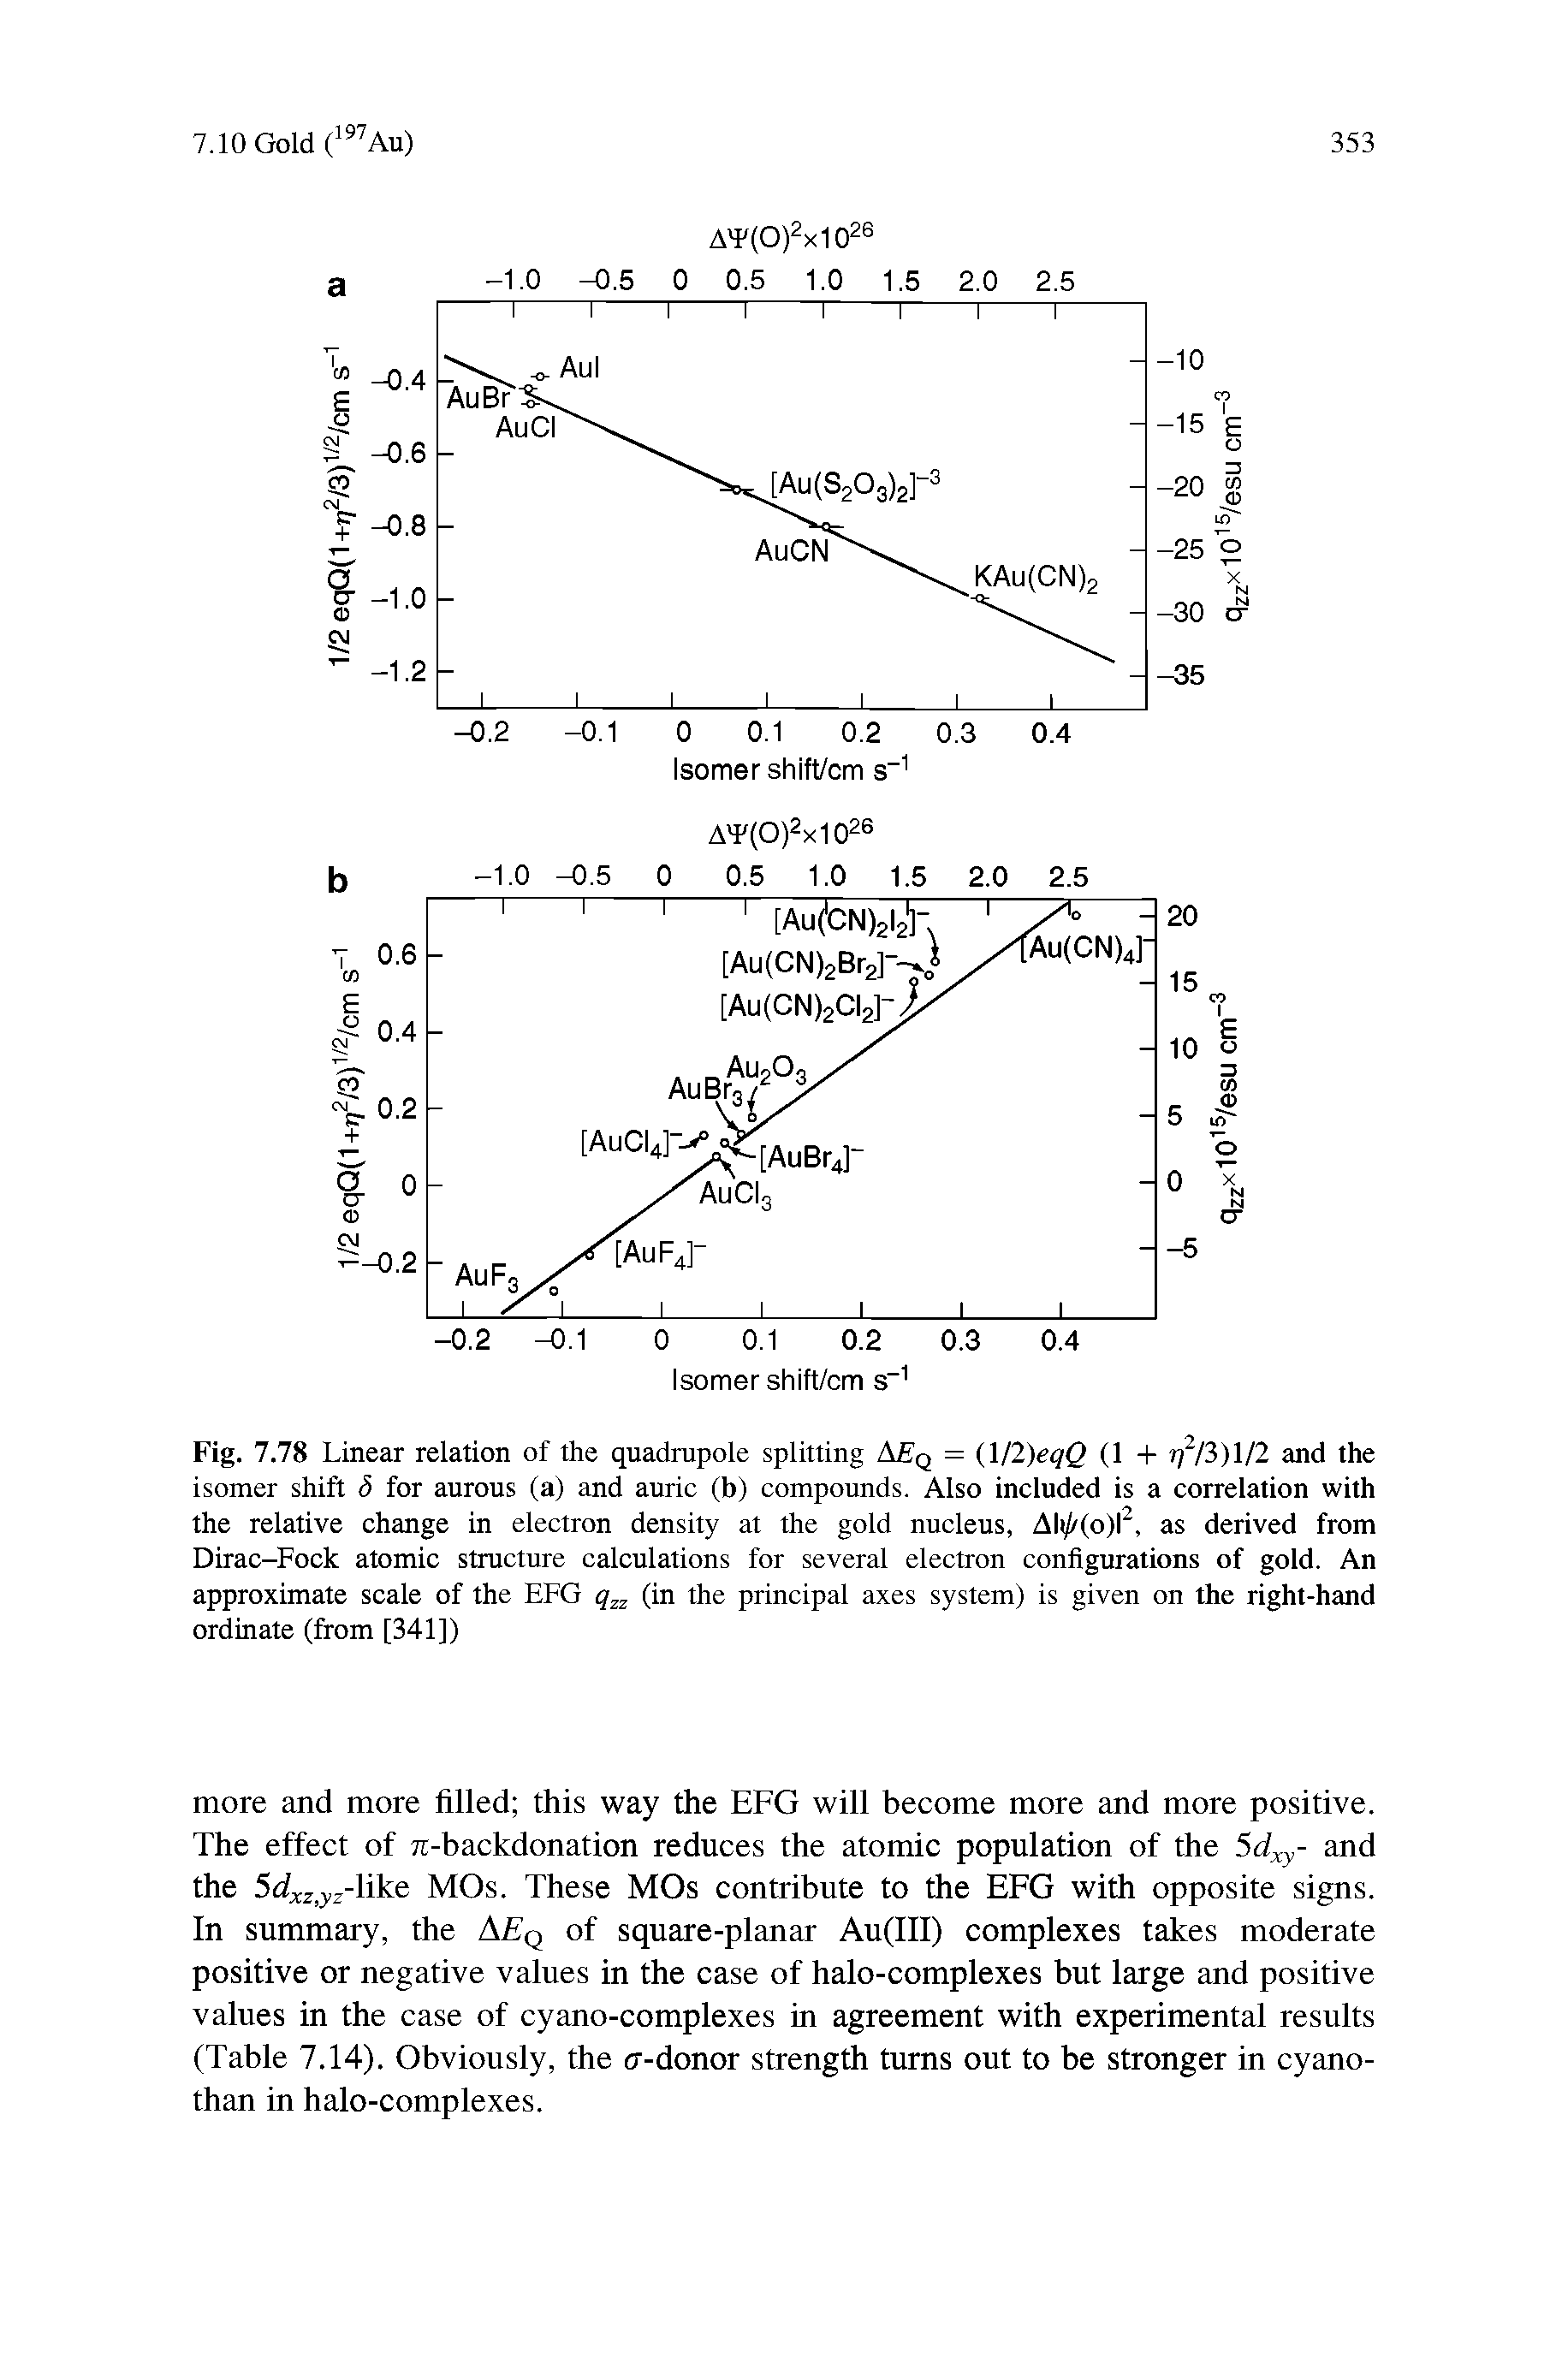 Fig. 7.78 Linear relation of the quadmpole splitting A q = ( jl)eqQ (1 + j /3)l/2 and the isomer shift b for aurous (a) and auric (b) compounds. Also included is a correlation with the relative change in electron density at the gold nucleus, Ali/r(o)P, as derived from Dirac-Fock atomic structure calculations for several electron configurations of gold. An approximate scale of the EFG (in the principal axes system) is given on the right-hand ordinate (from [341])...